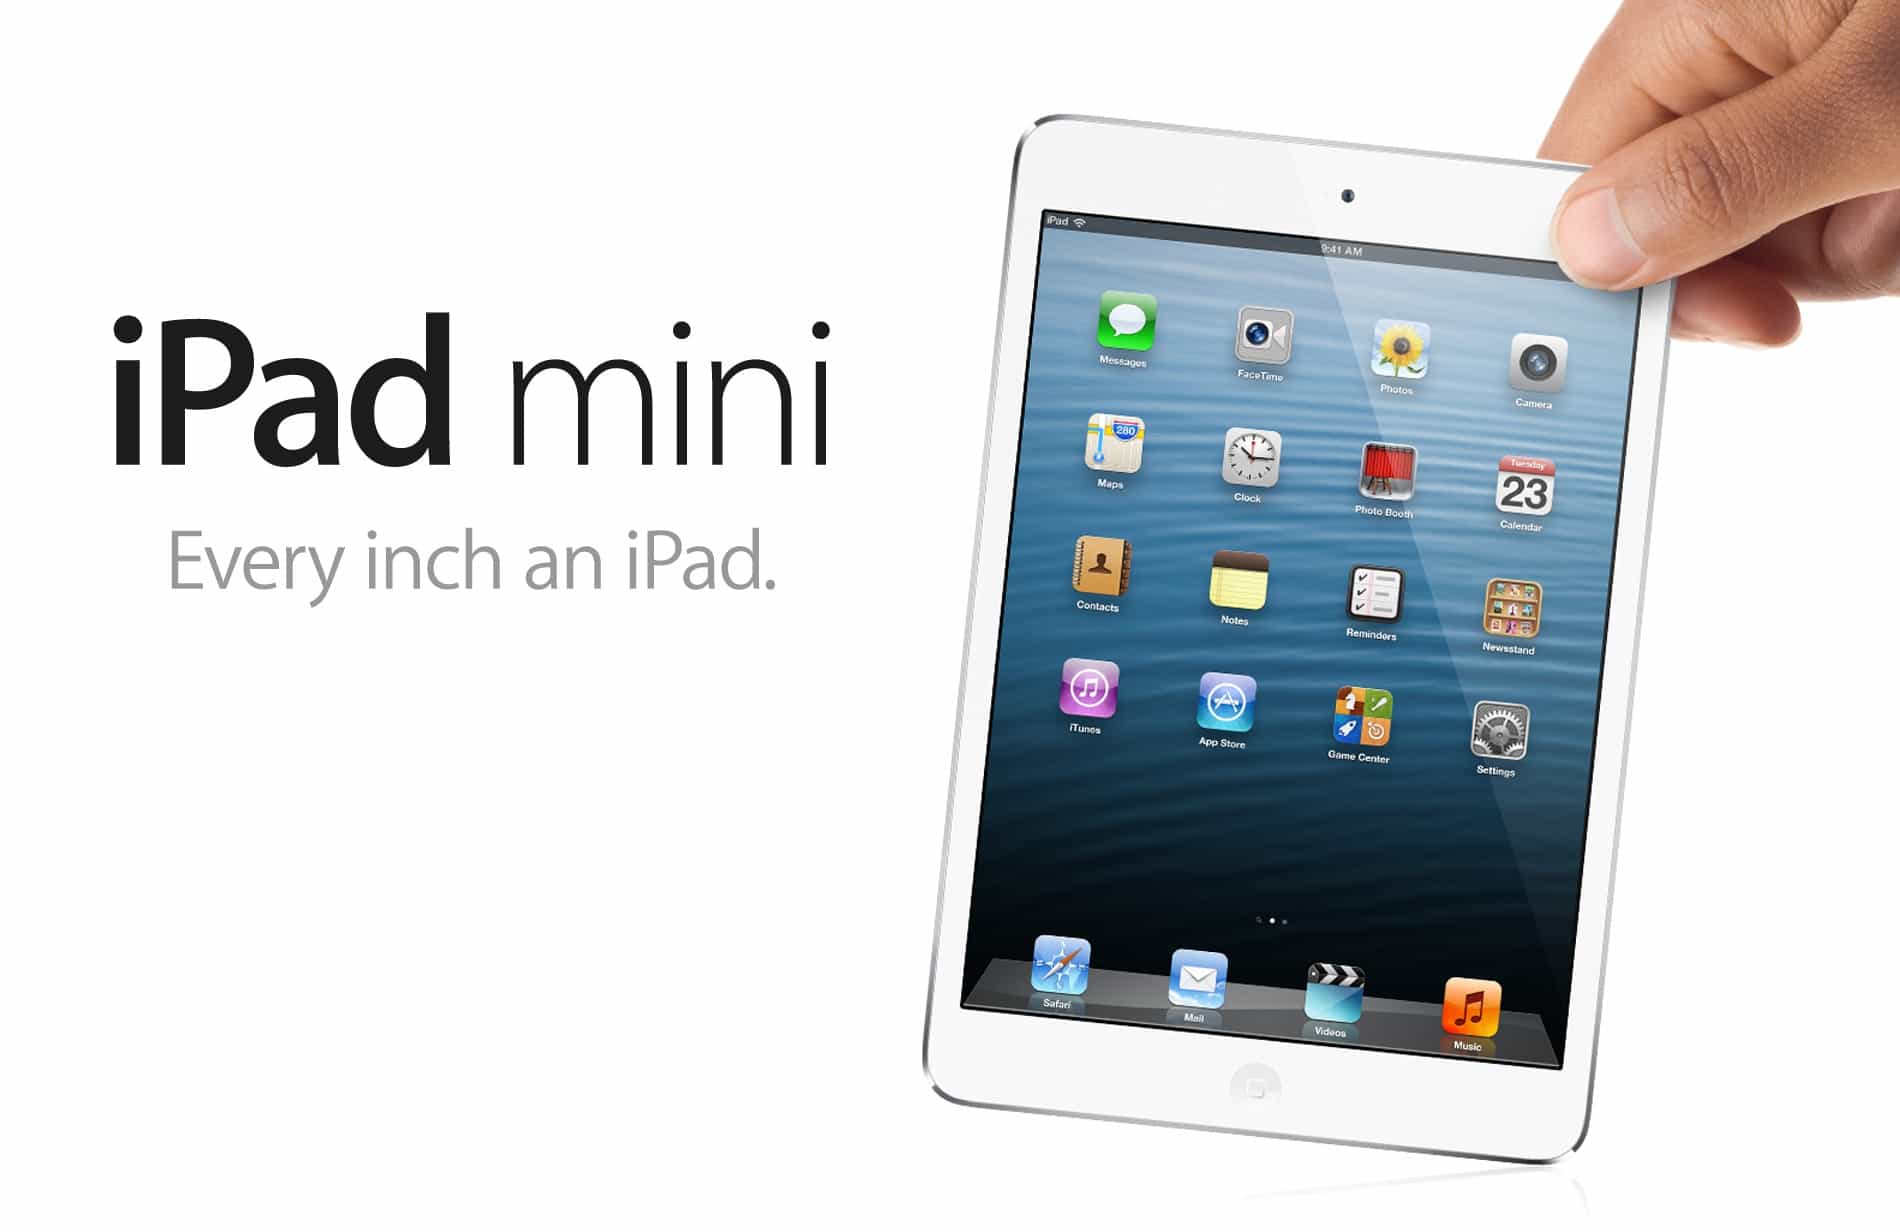 The iPad mini made a big splash for such a tiny device.